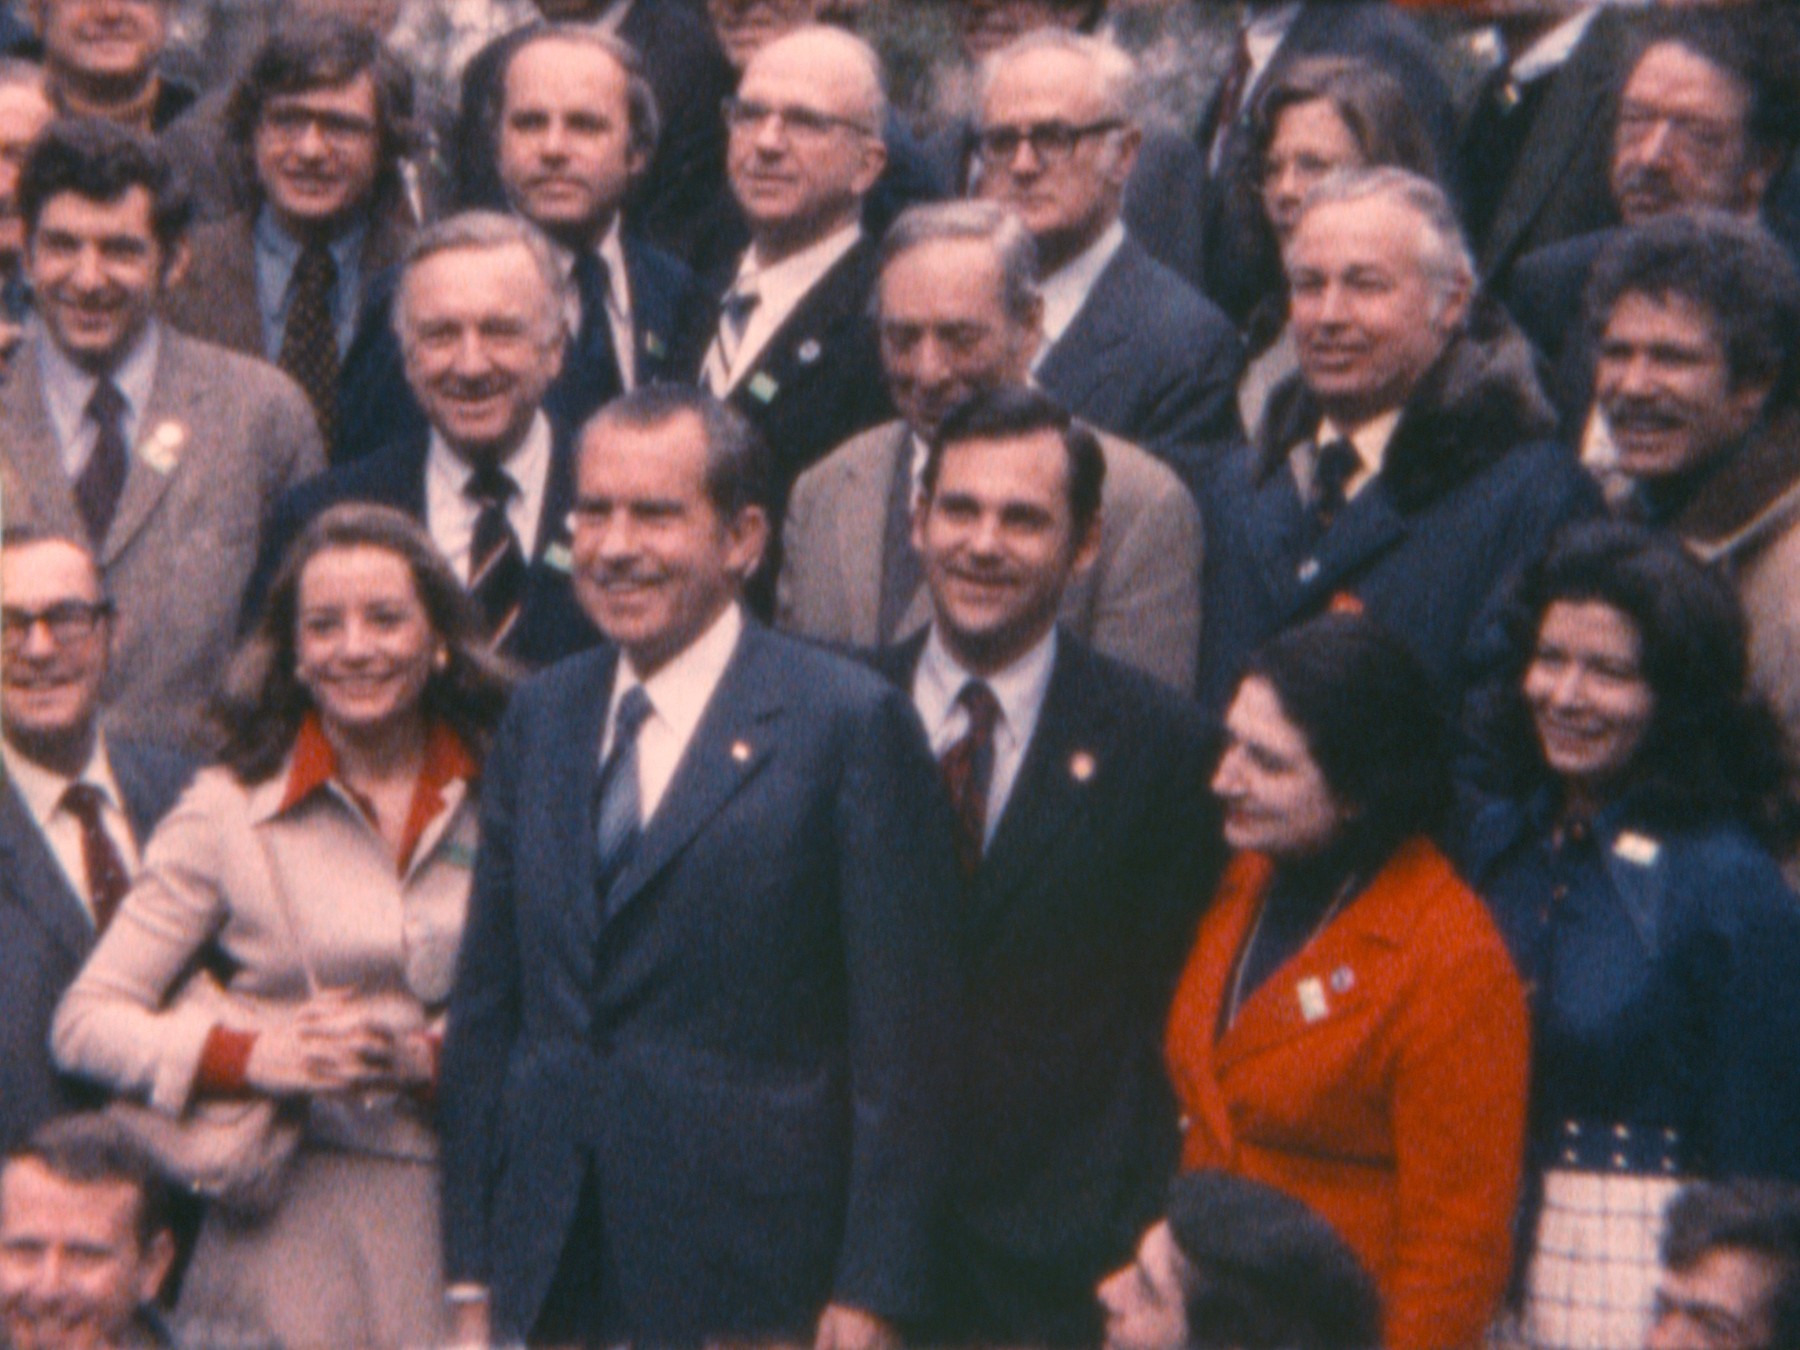 Nixon and the 87 members of the press who came with him to China pose for a photo